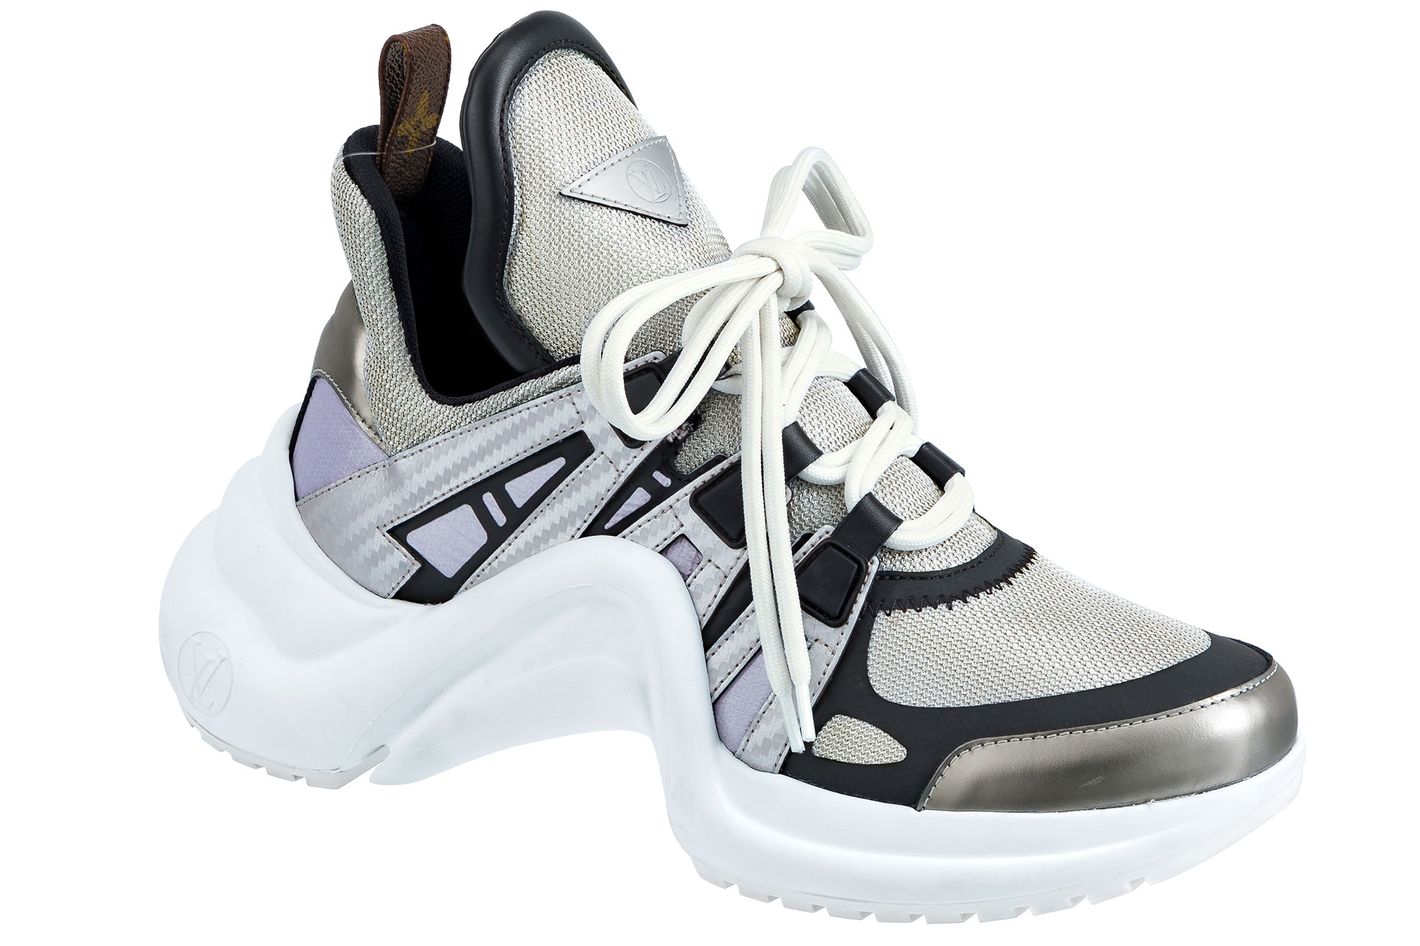 Louis Vuitton LV Archlight Sneakers As Seen On Celebrities